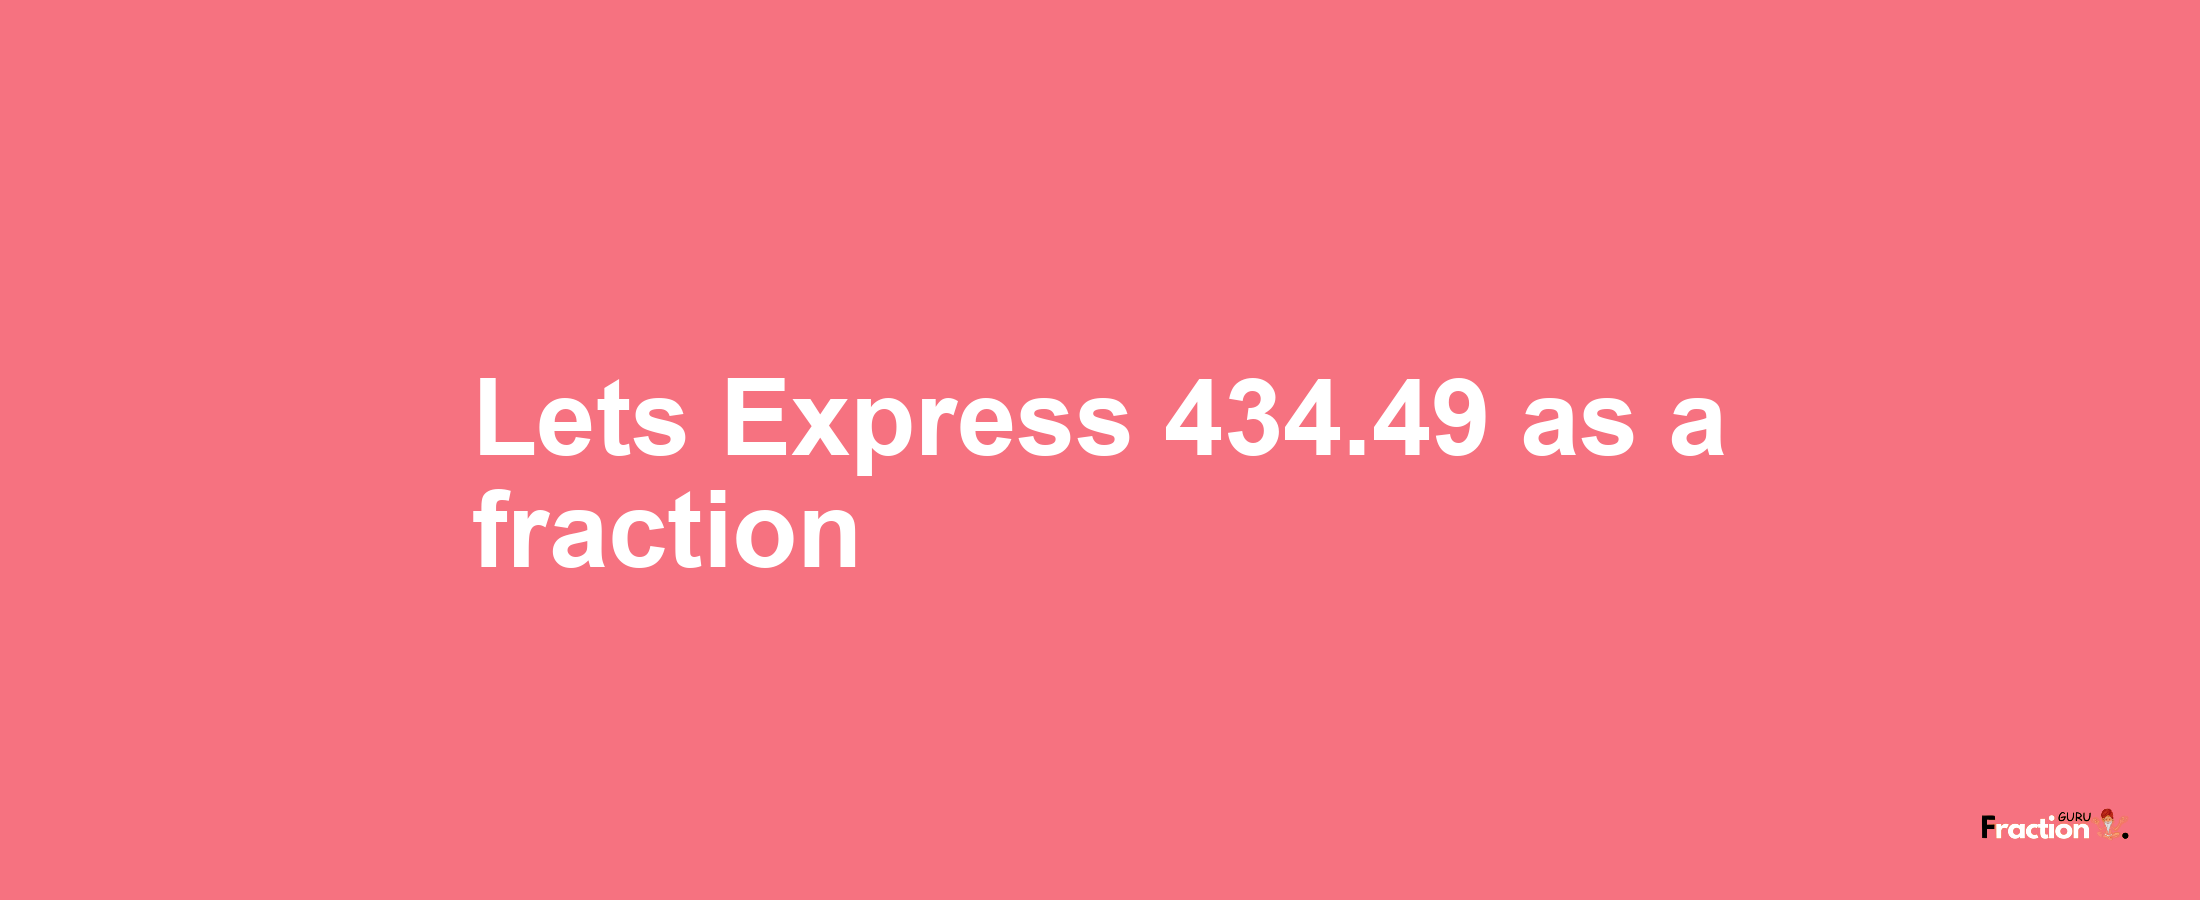 Lets Express 434.49 as afraction